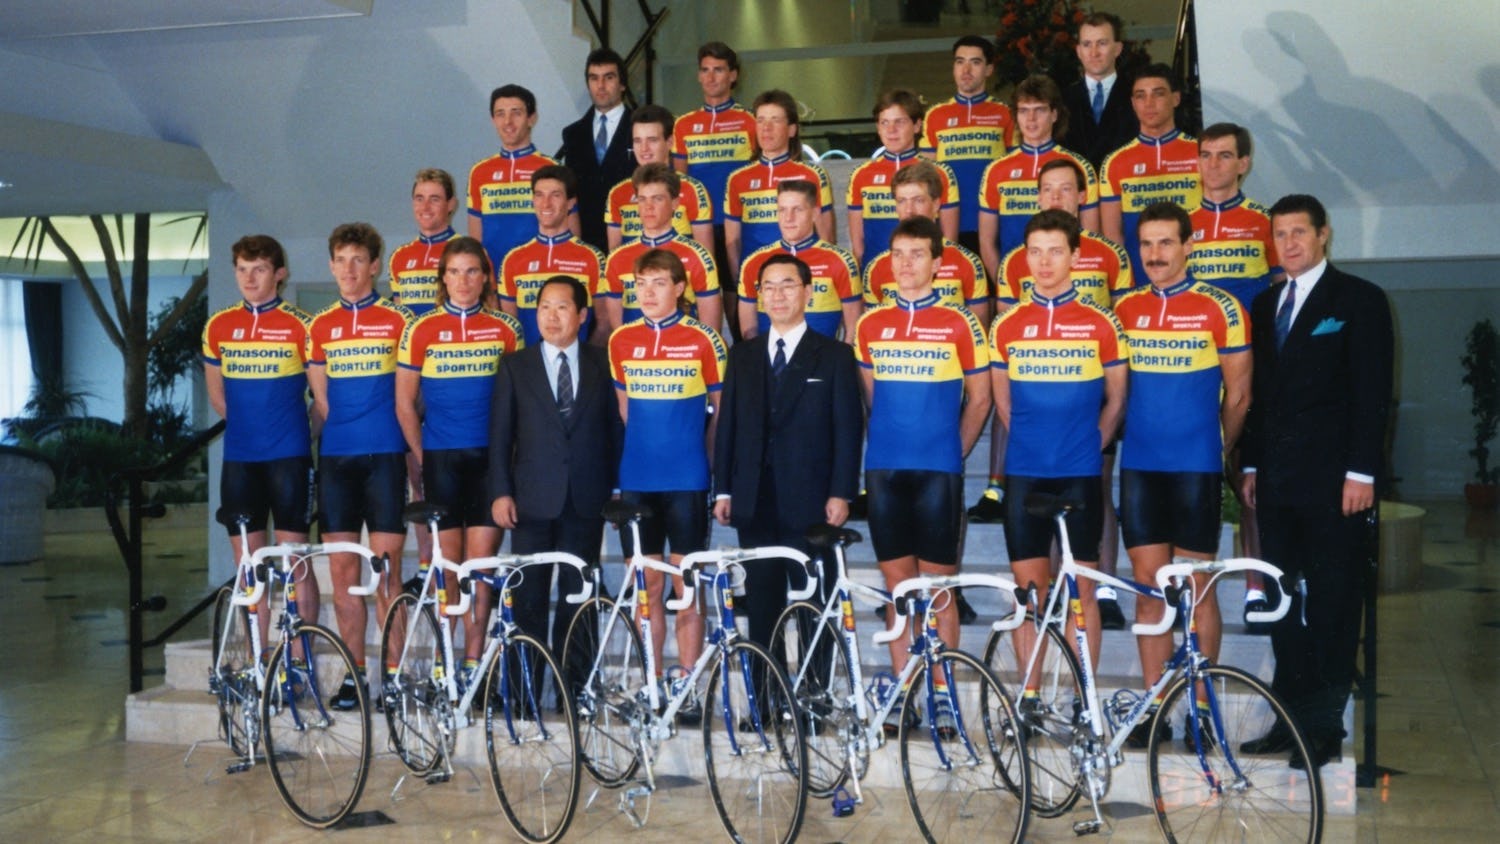 In the 90s they sponsored the Panasonic racing team in the Netherlands by supplying road racers etc. The team won several times in European international races e.g. Tour de France.